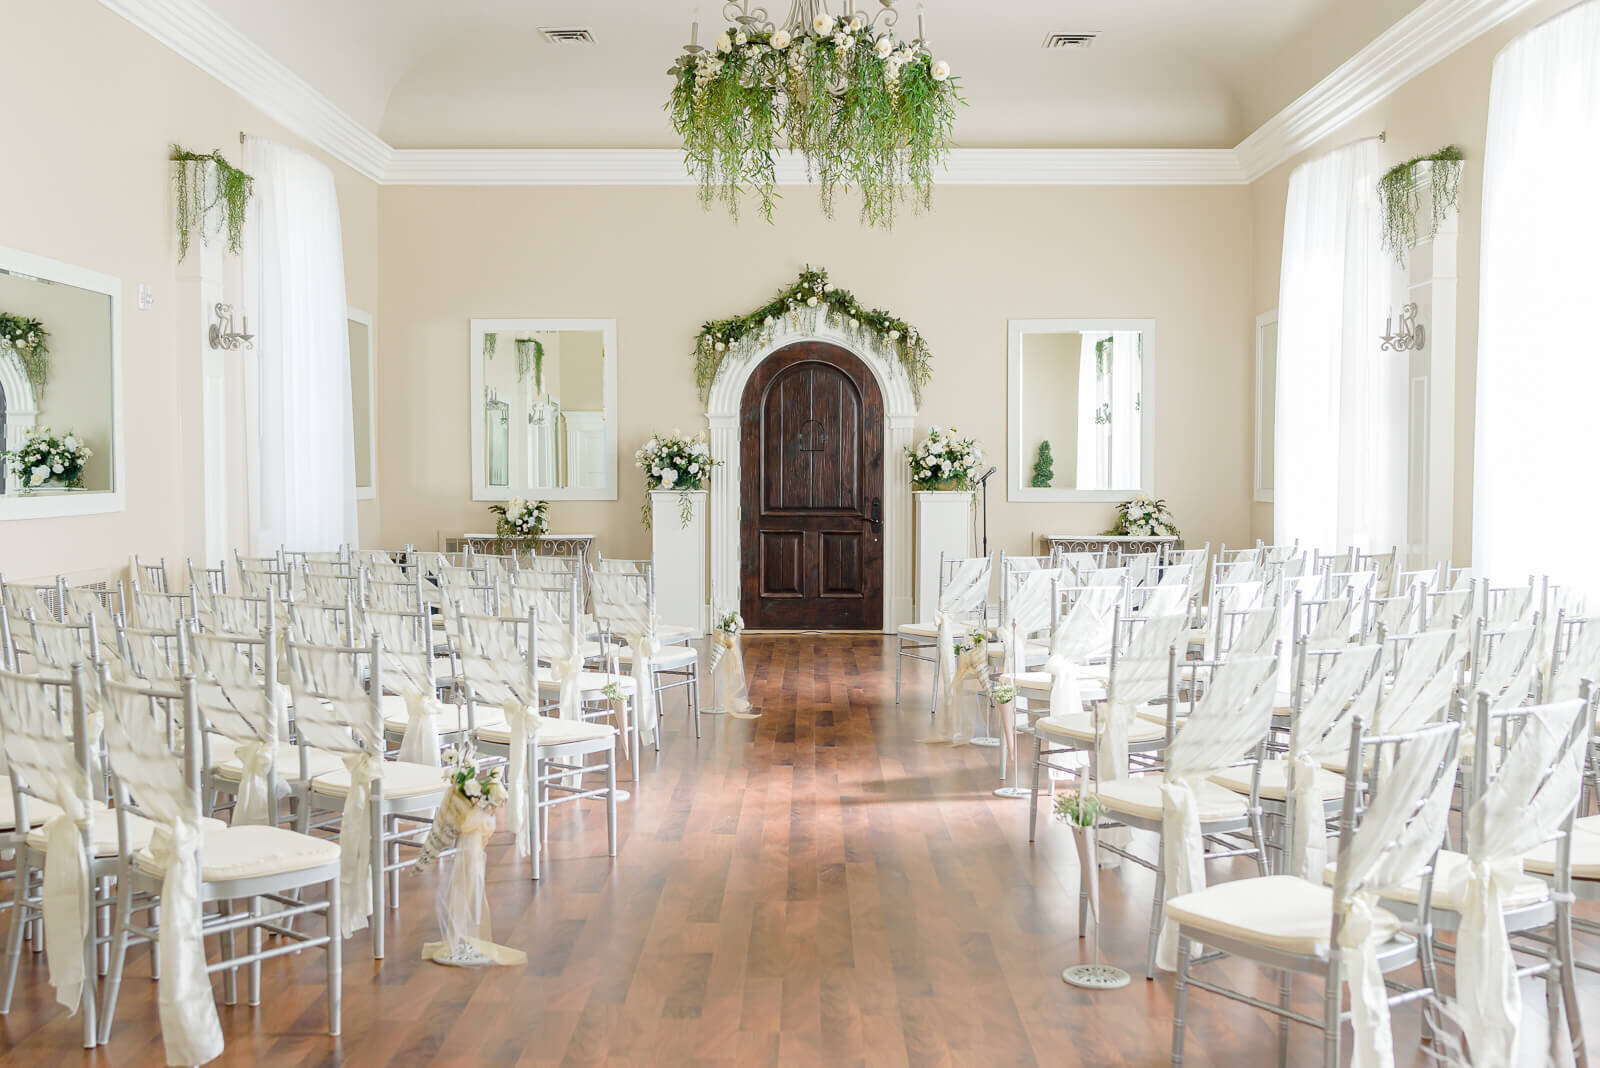 Light shines through the windows of the intimate wedding chapel at Stone Gate Weddings in Pleasant Grove.